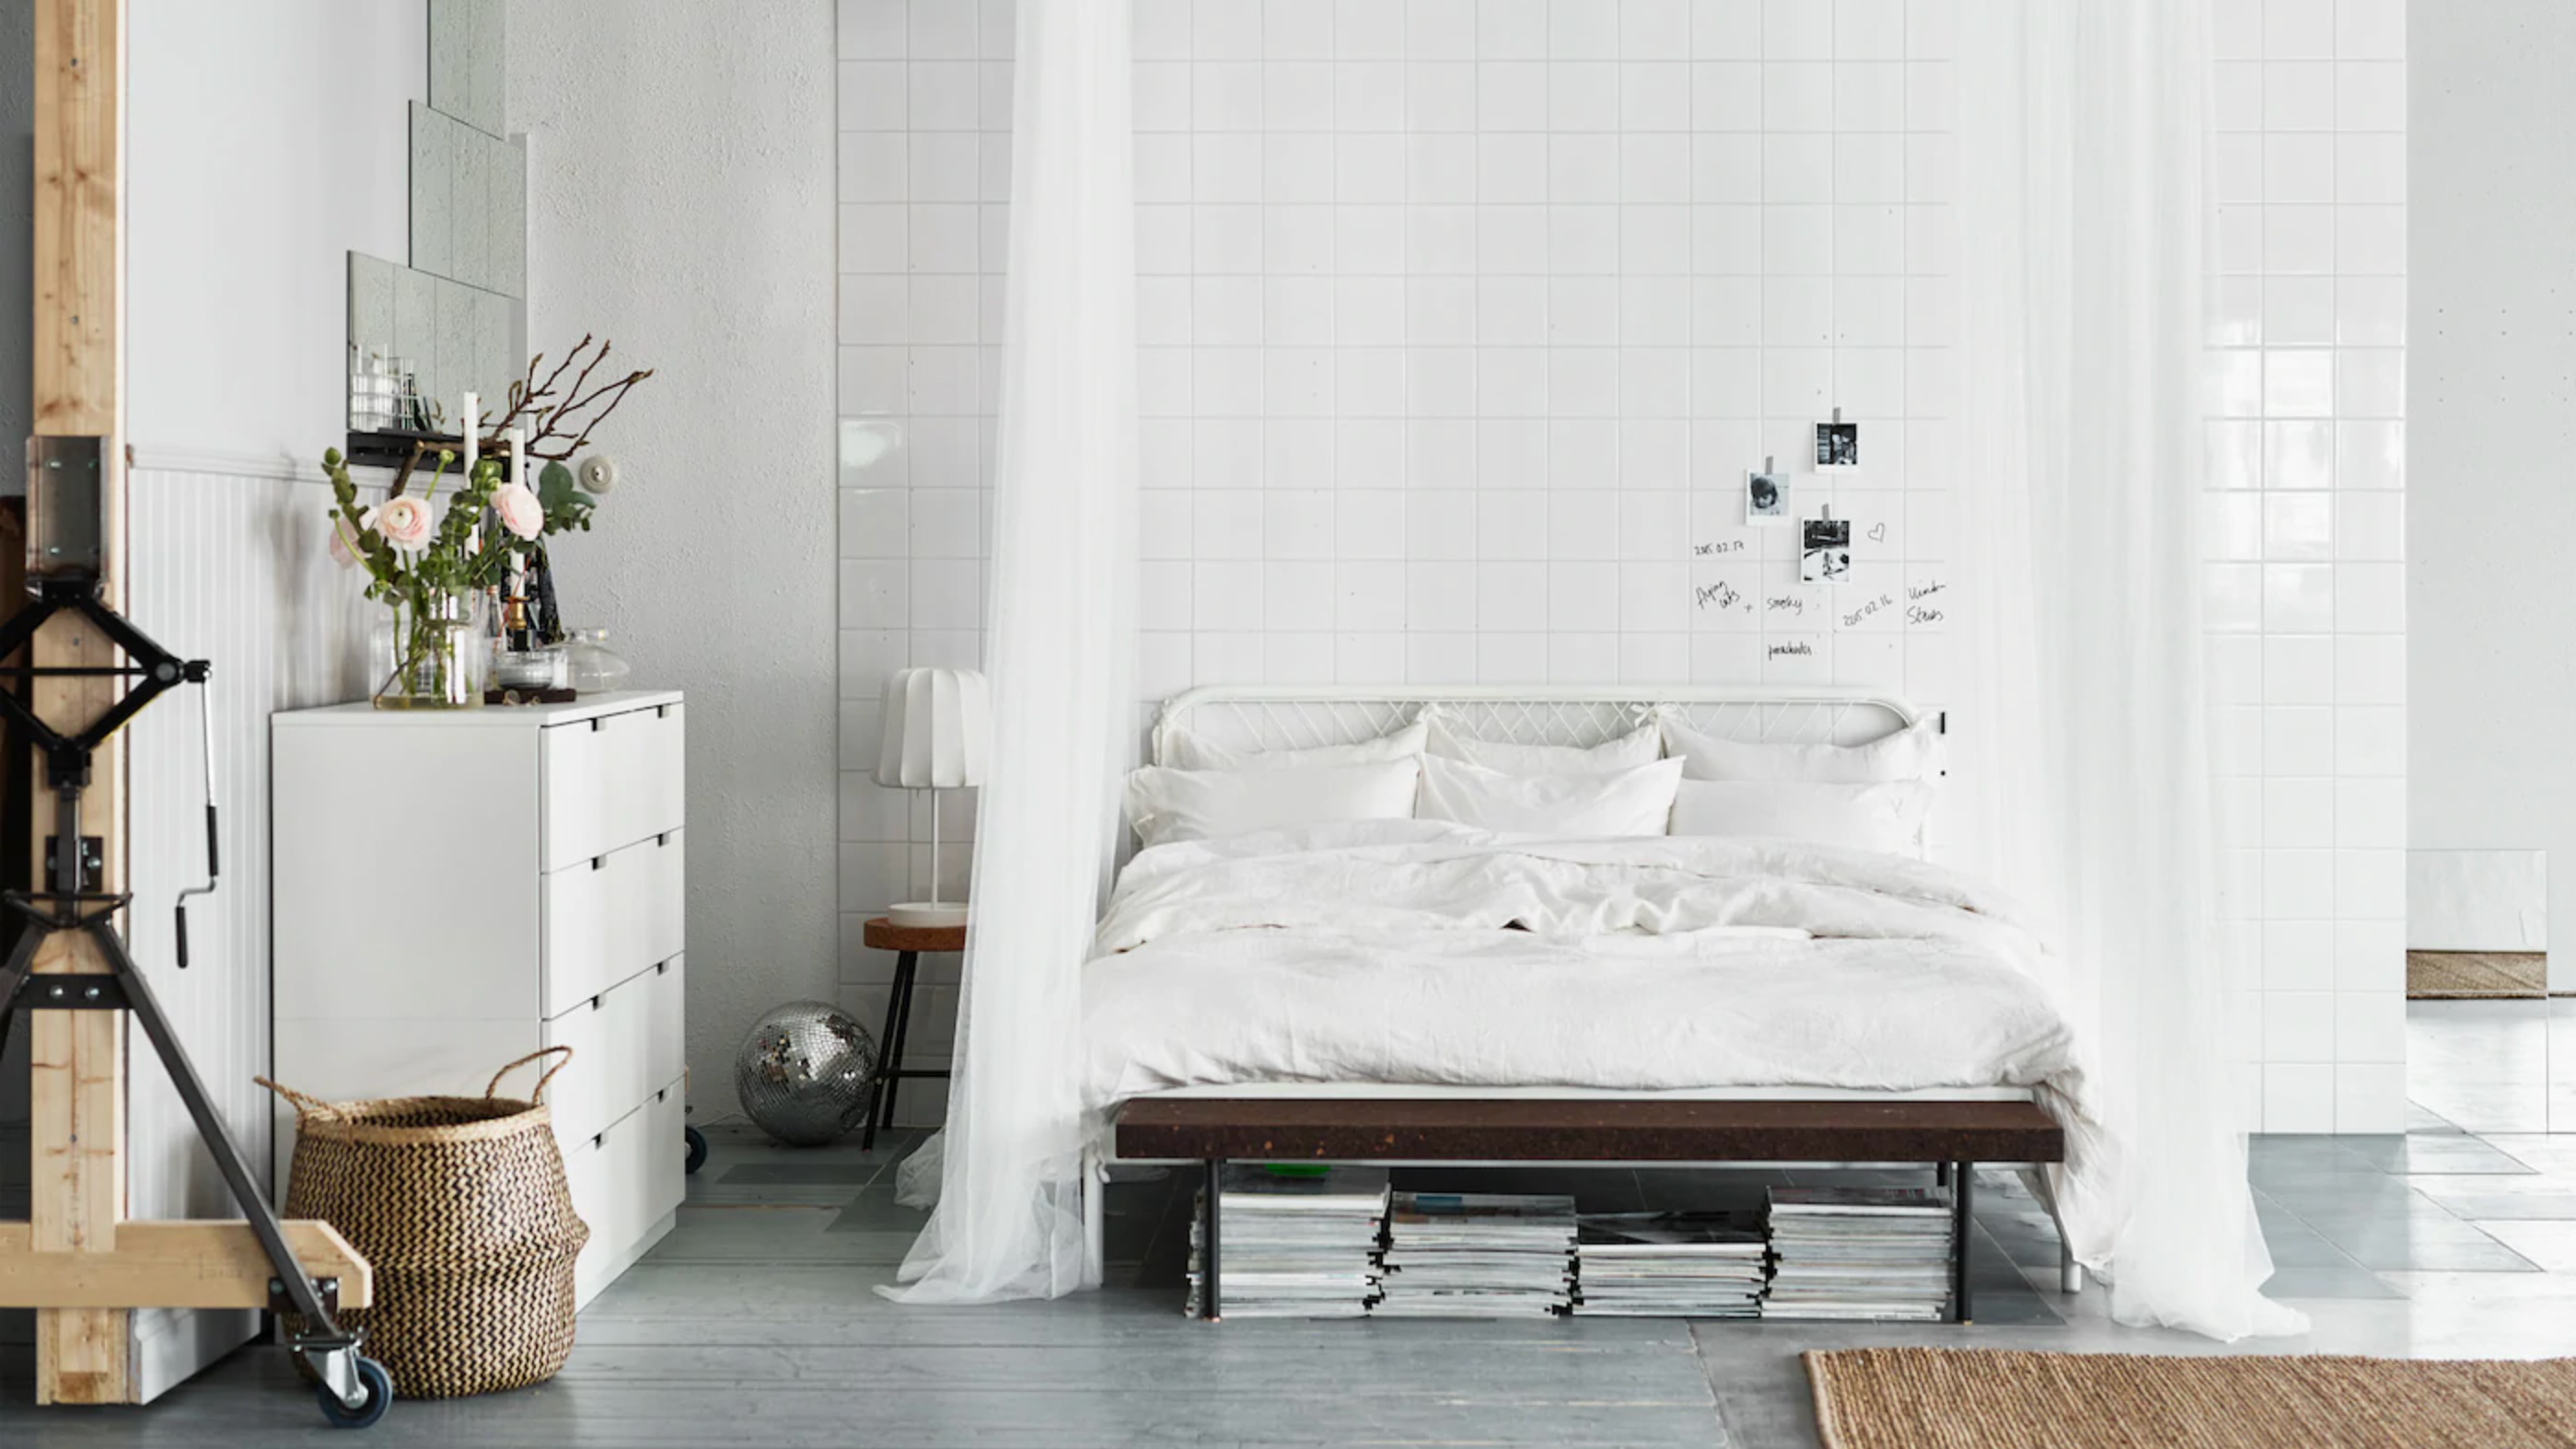 18 budget bedroom ideas for a cheap makeover that looks expensive ...